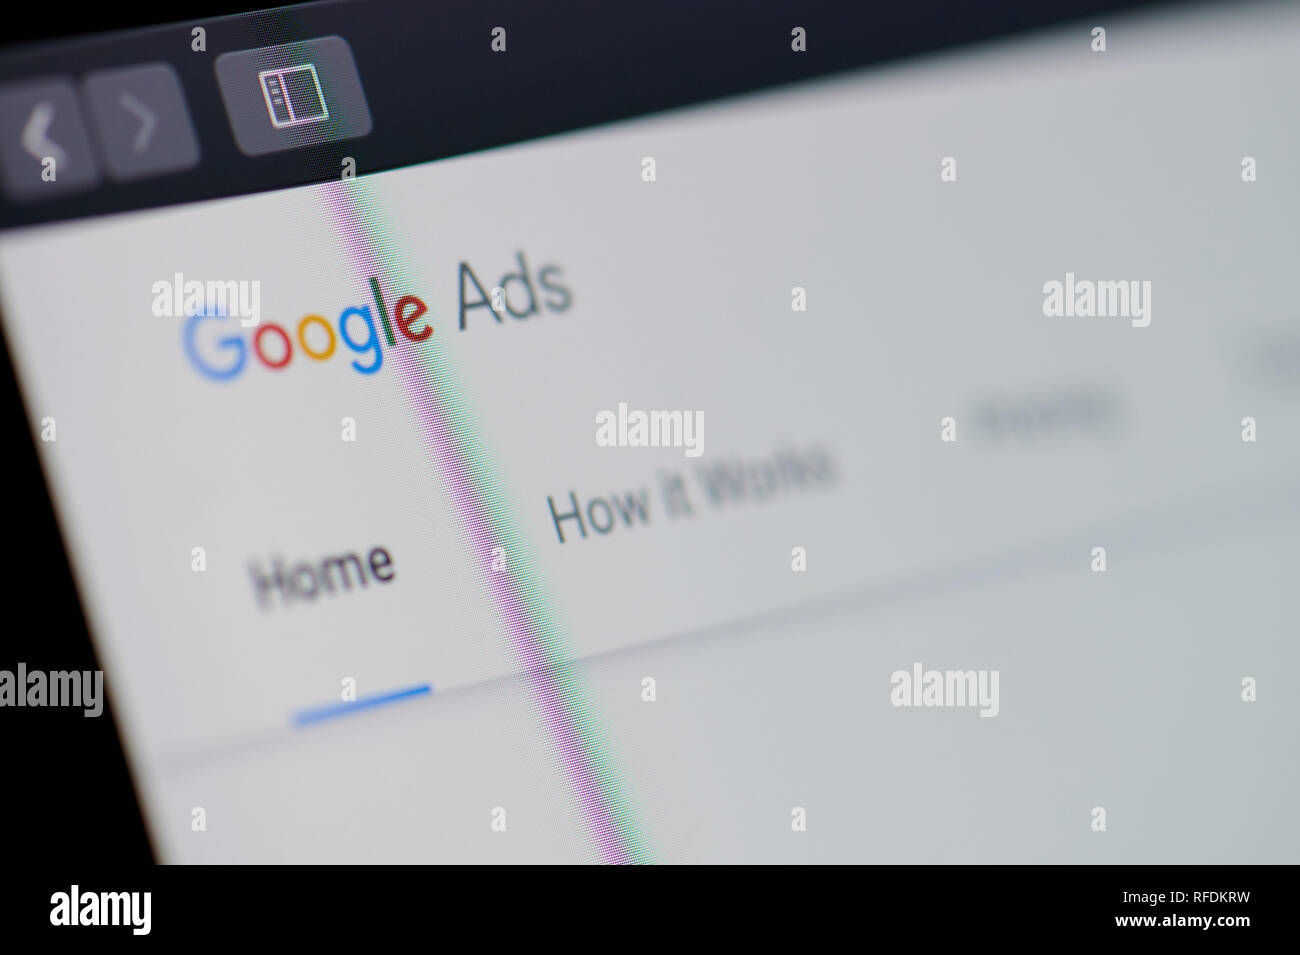 New york, USA - january 24, 2019: Google ads home page on device screen pixelated close up view Stock Photo